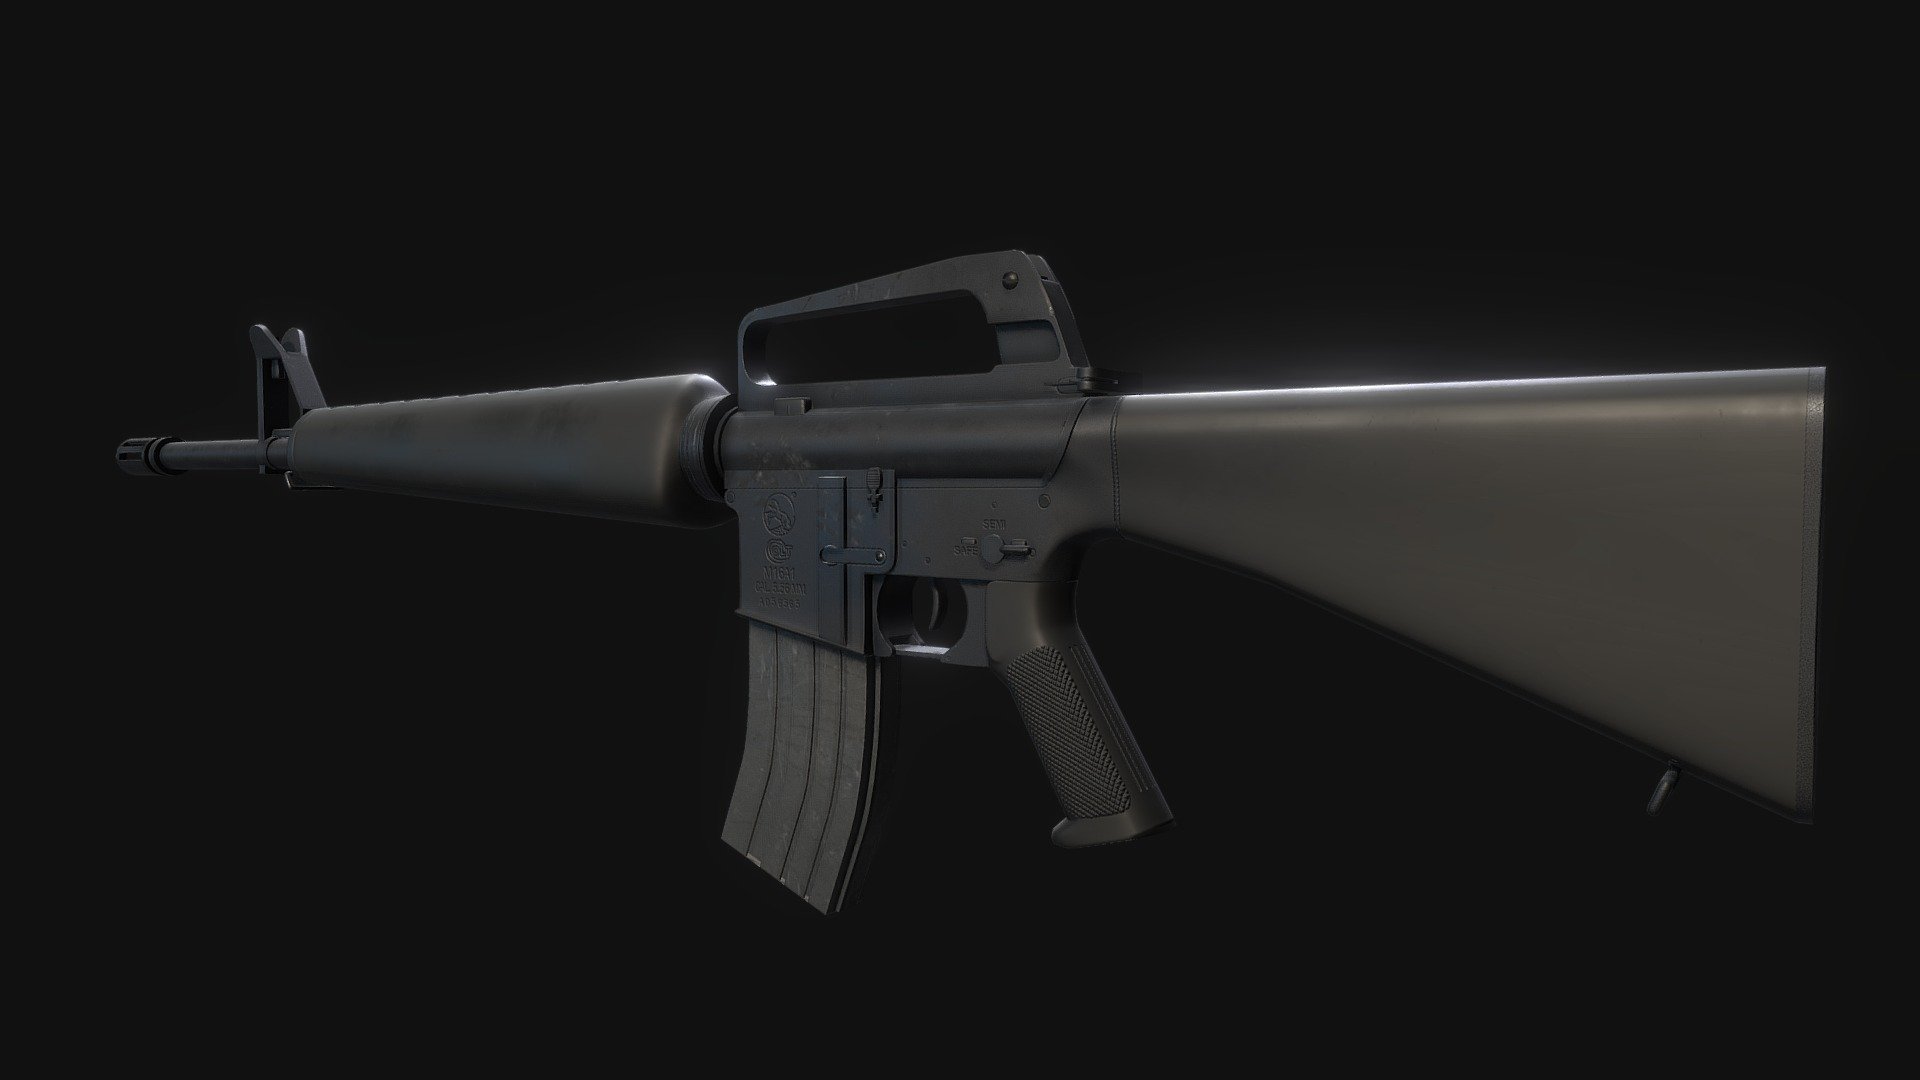 Second iteration of M16 rifle modeled using Maya and textured with Substance Painter 2 3d model